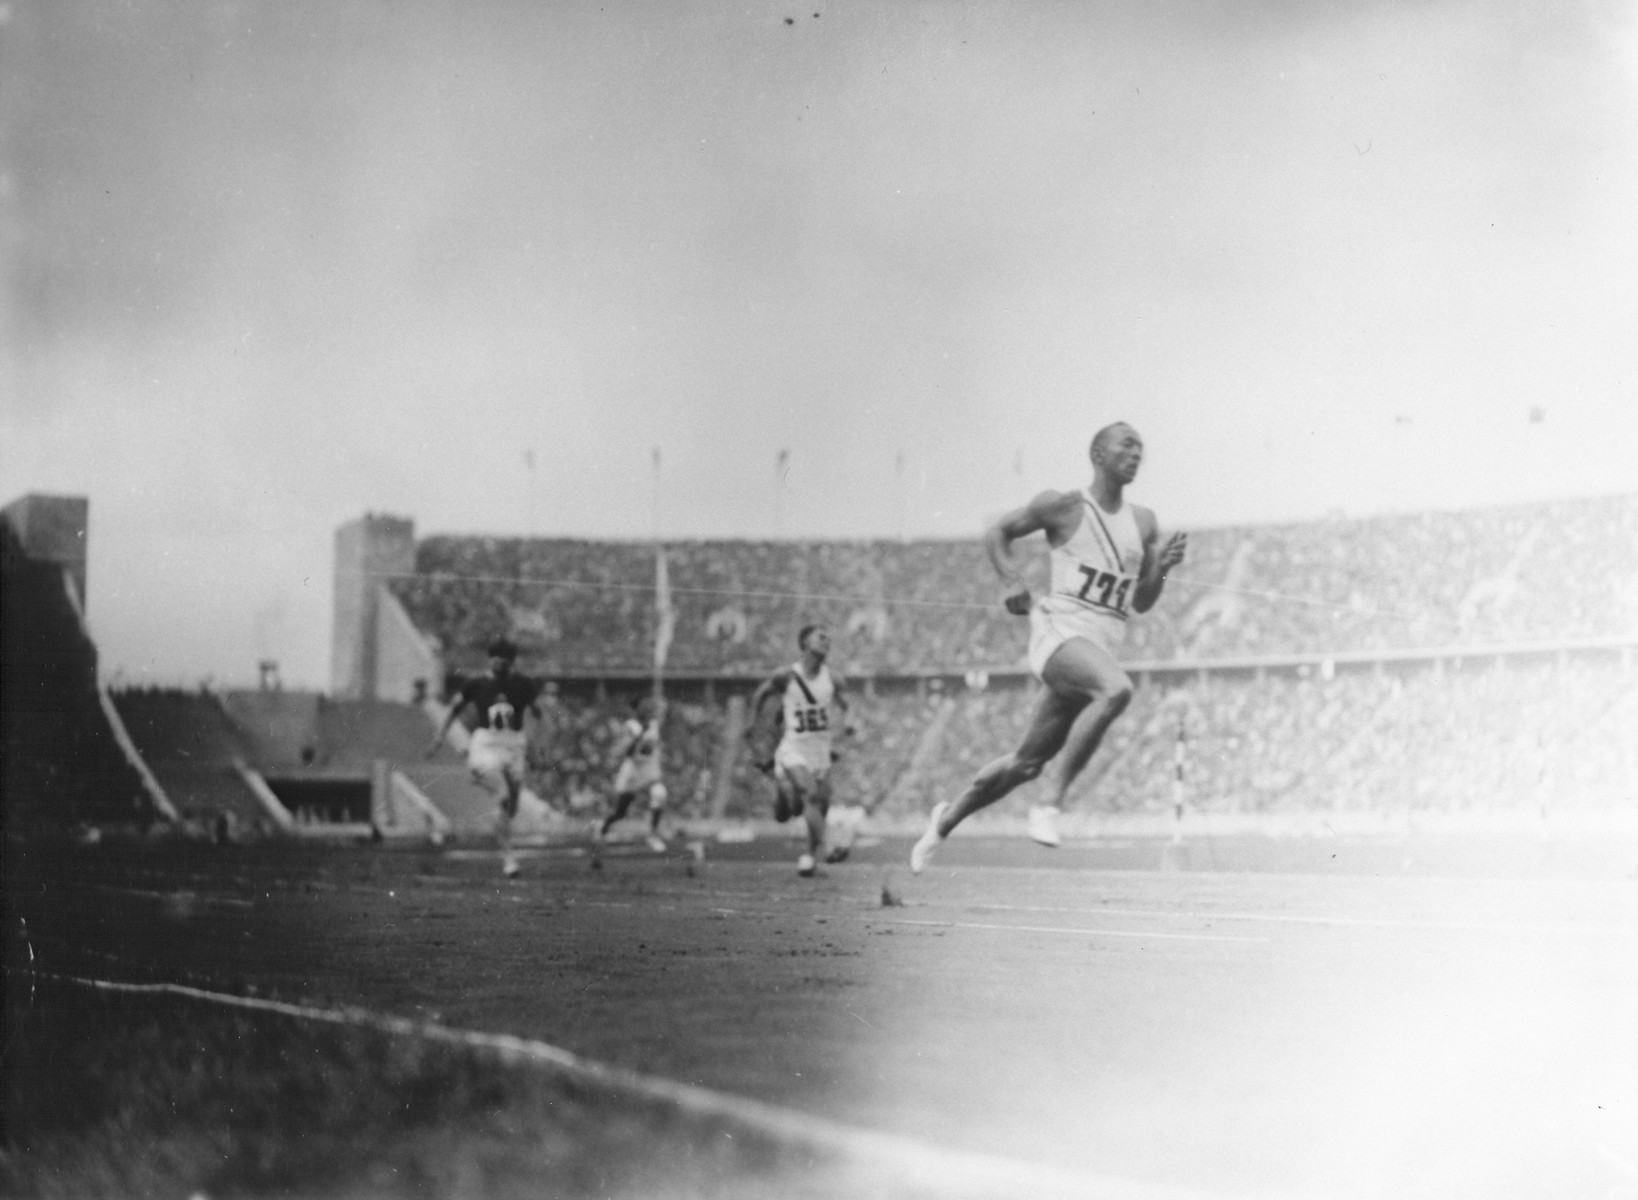 American Olympic runner Jesse Owens and other Olympic athletes compete in the twelfth heat of the first trial of the 100m dash.  

Owen won the race.  He ultimately took first place in the event, finishing the race in 10.2 seconds, a record time; however, the record was disallowed by German officials, who claimed that Owens had had the benefit of a tailwind.